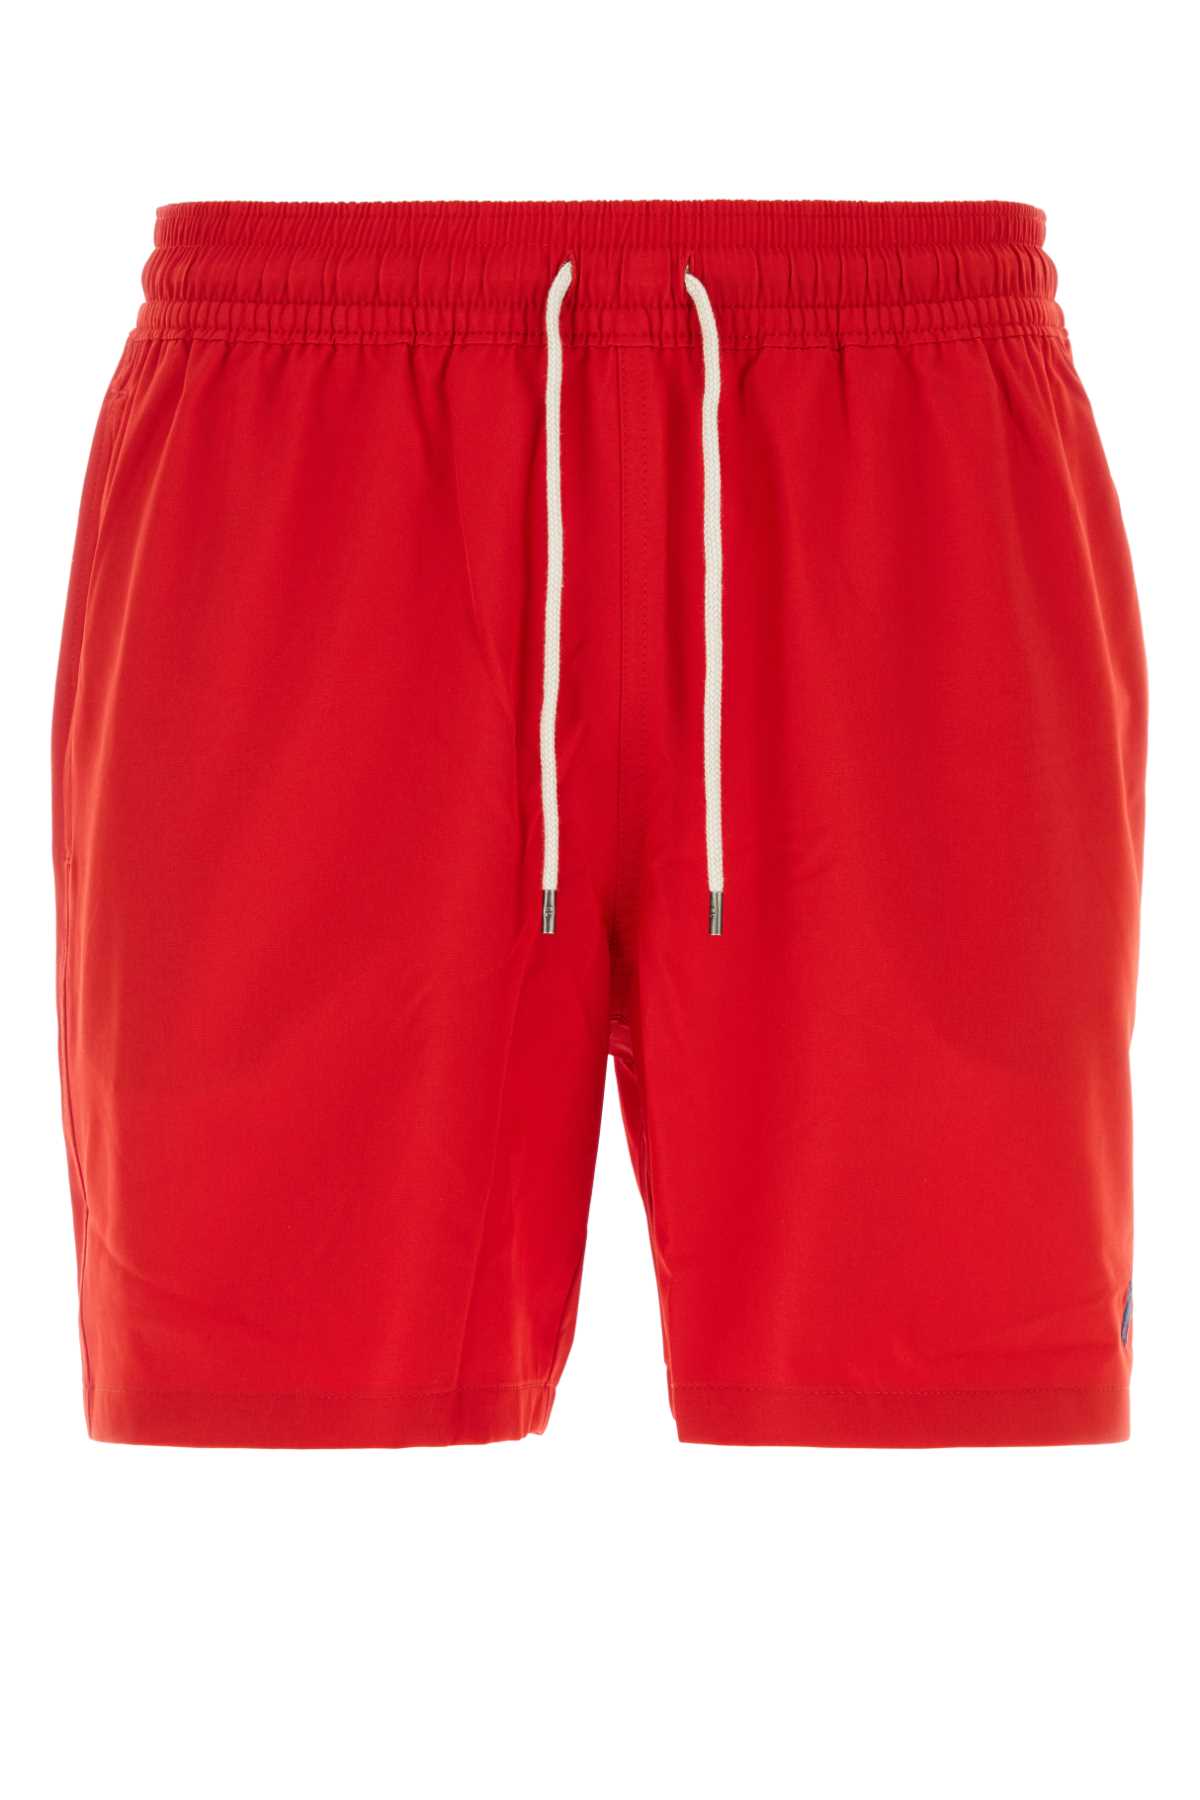 Shop Polo Ralph Lauren Red Stretch Polyester Swimming Shorts